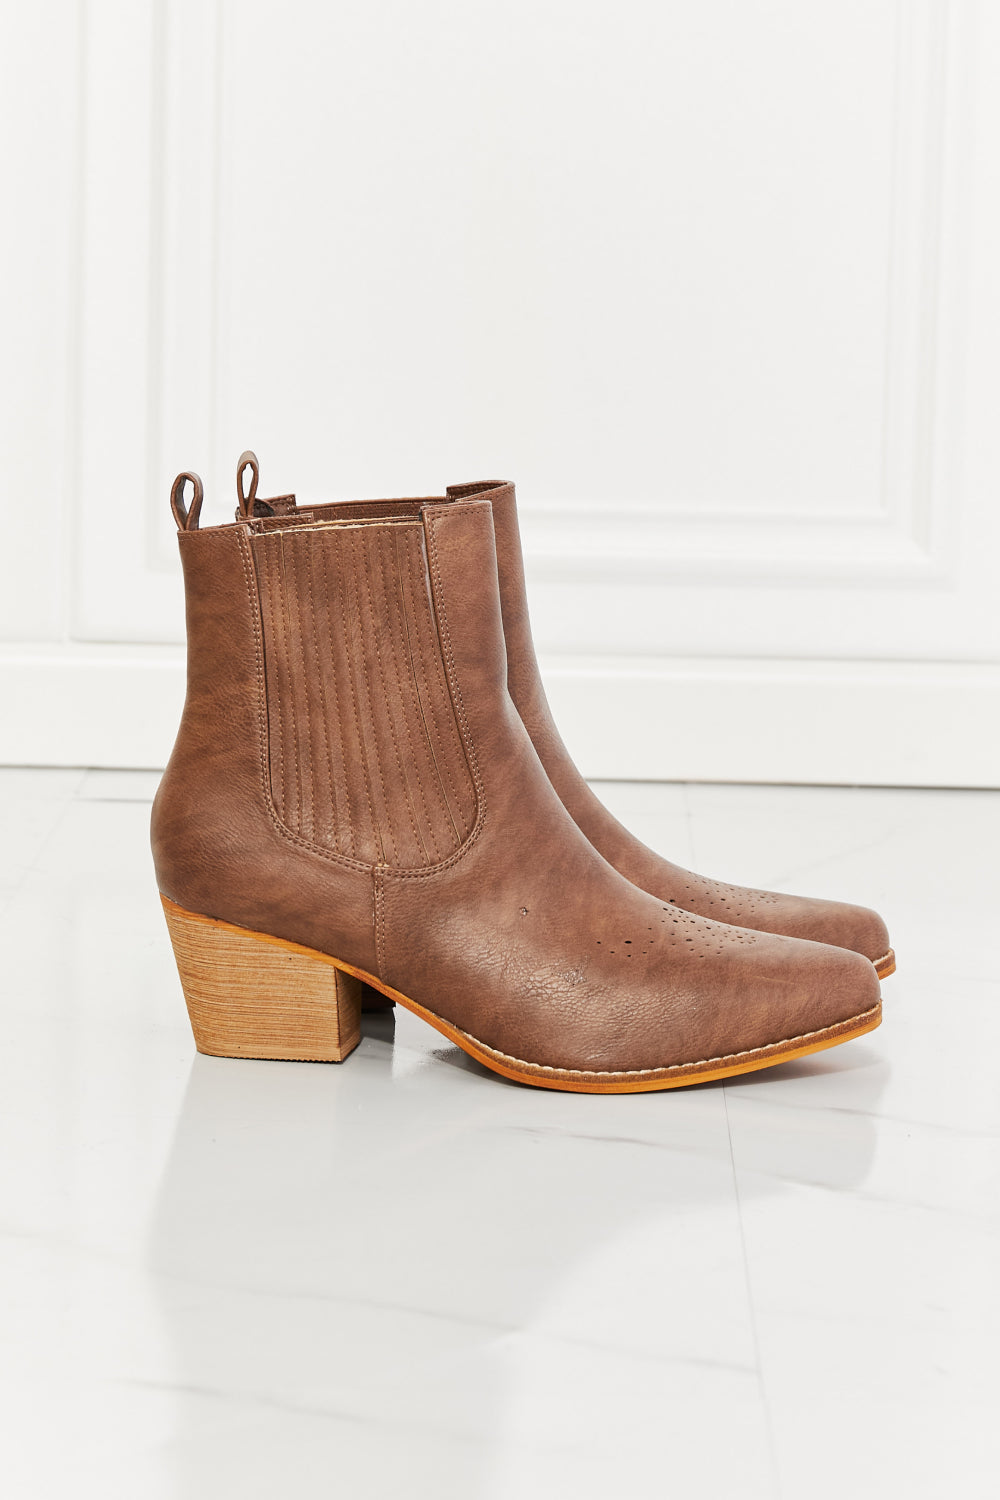 MMShoes Love the Journey Stacked Heel Chelsea Boot in Chestnut - AllIn Computer